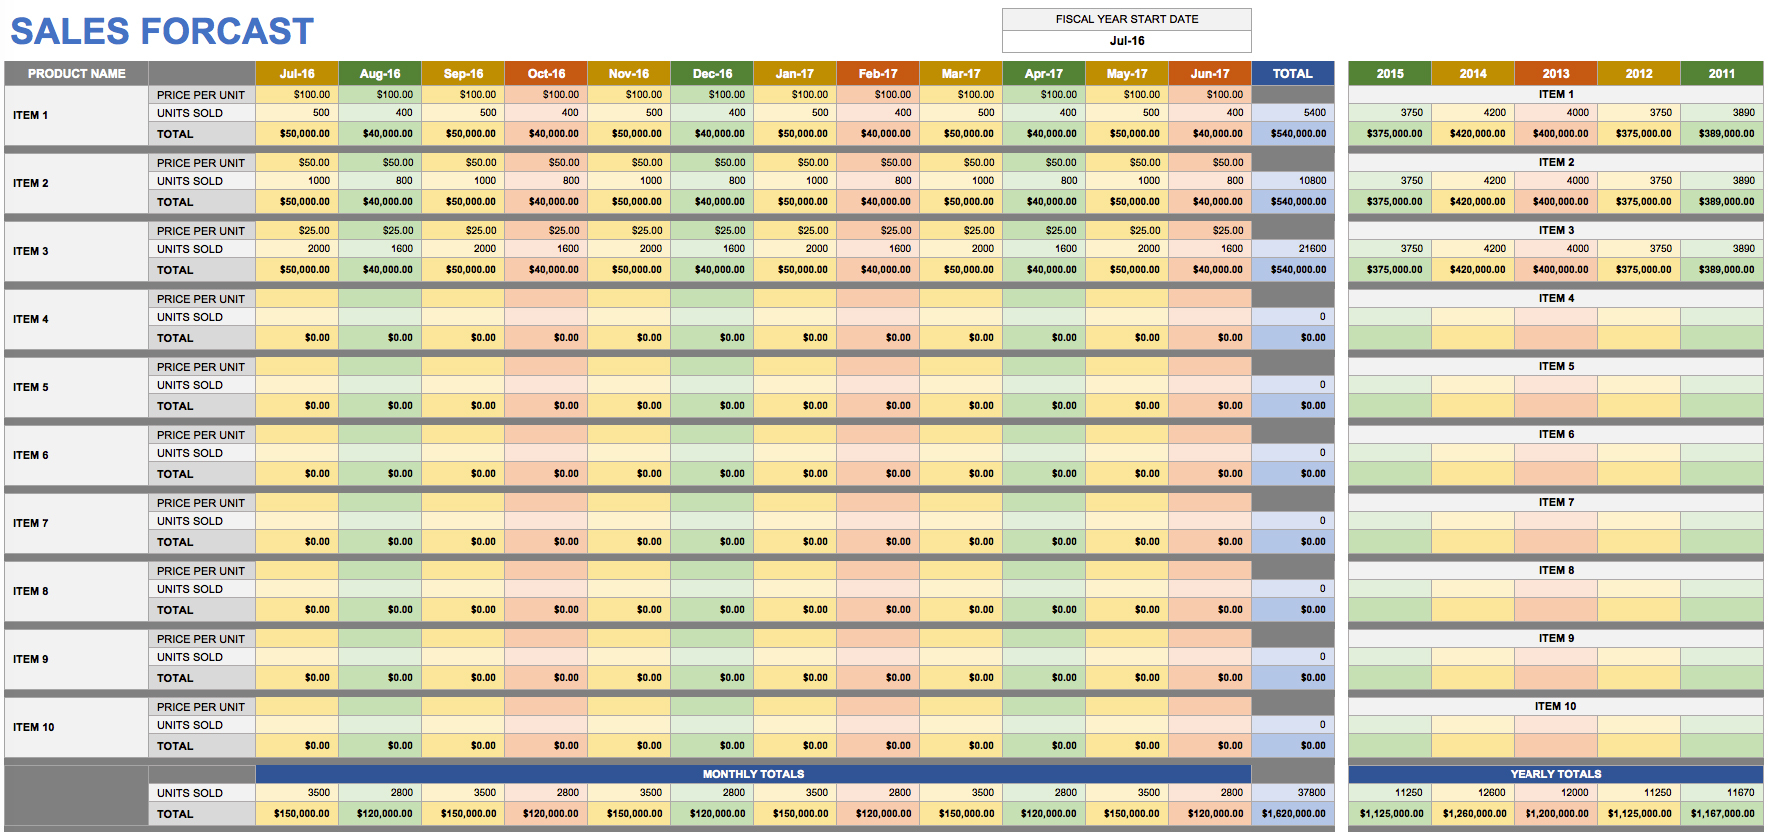 Sales Forecast Spreadsheet Sample Score For Restaurant Excel And Sales Forecast Templates